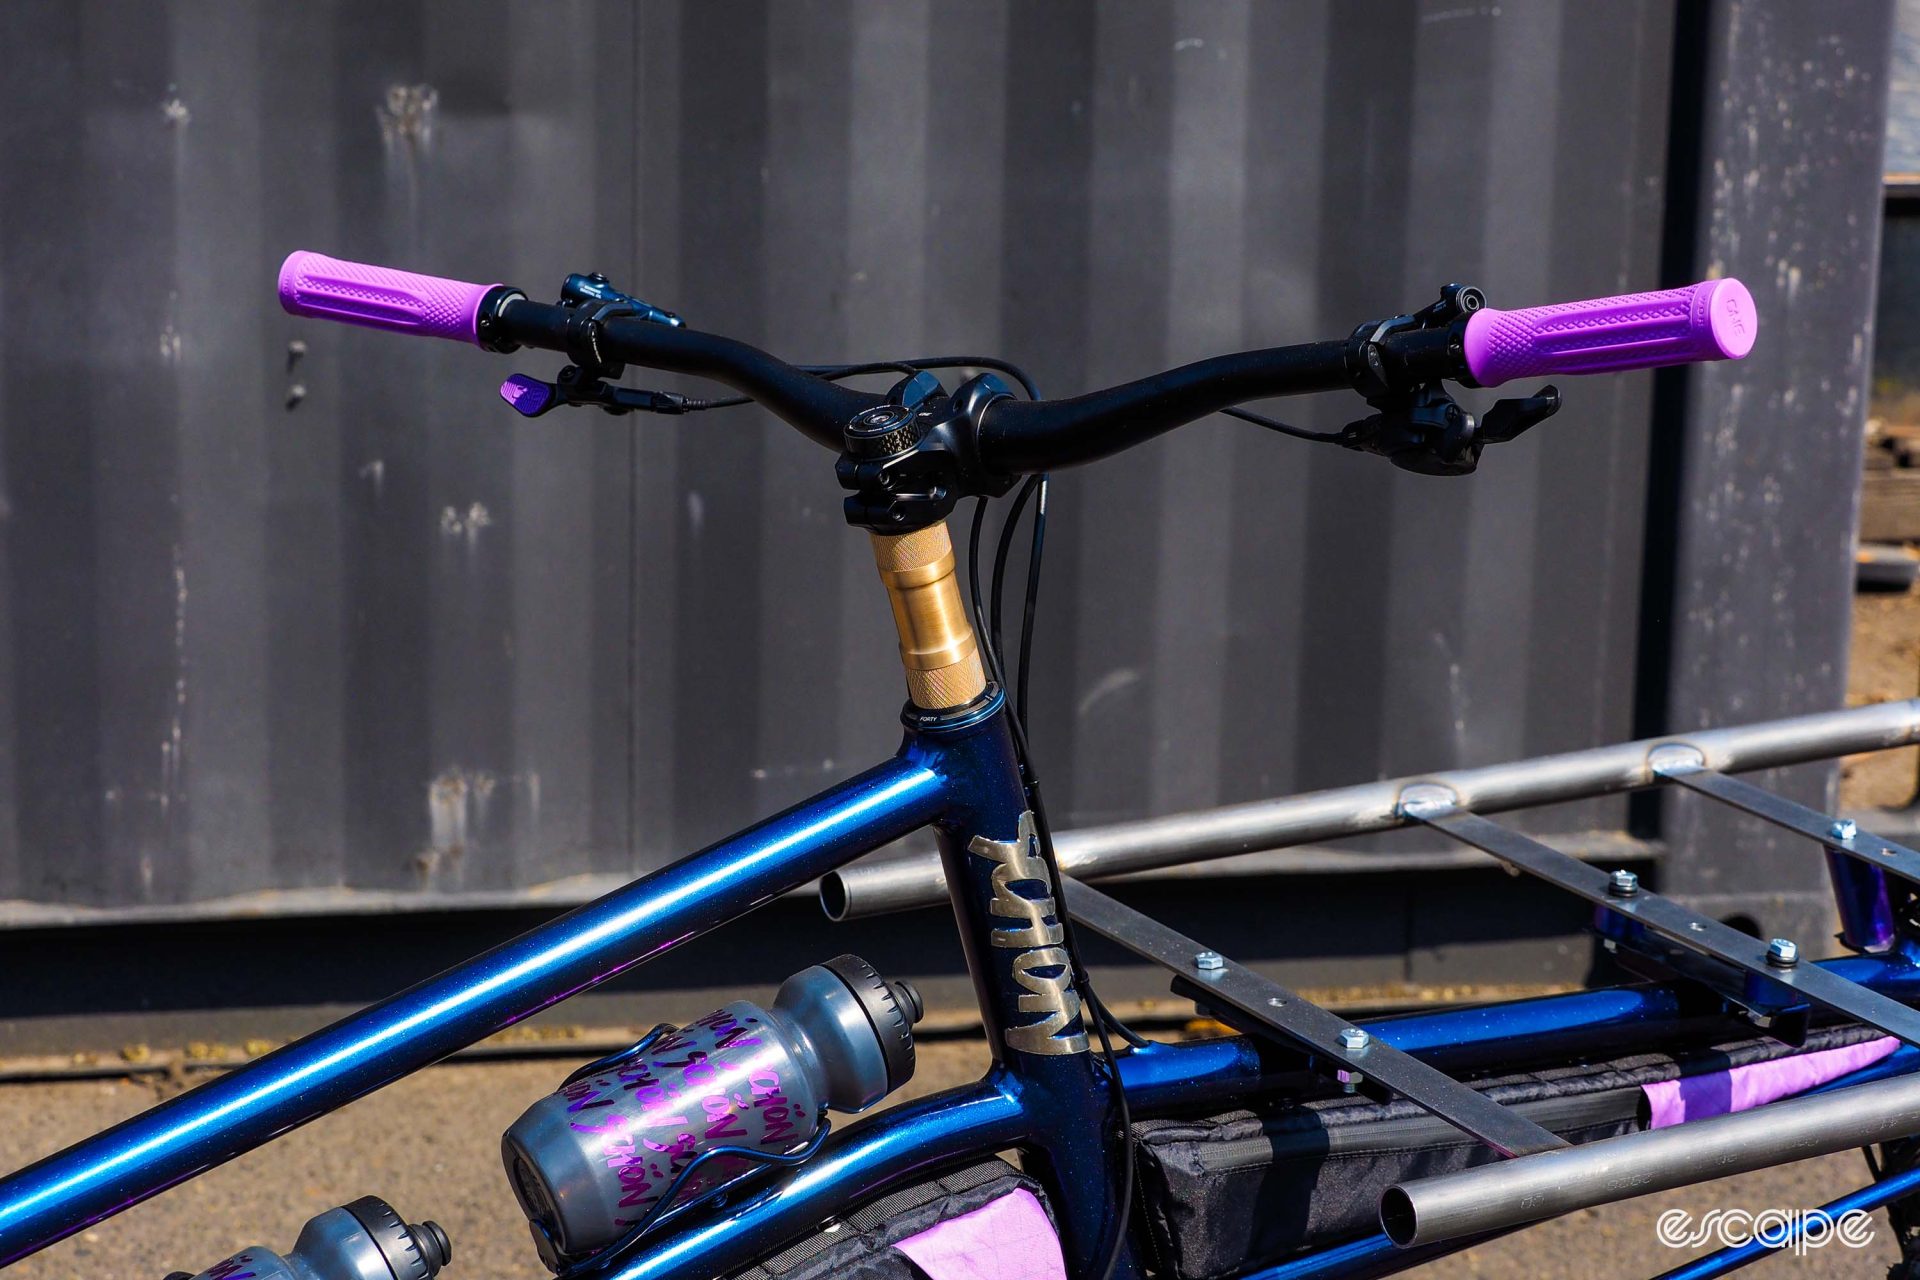 Detail shot of headtube area, showing a tall, visually striking brass spacer beneath the handlebar and stem.